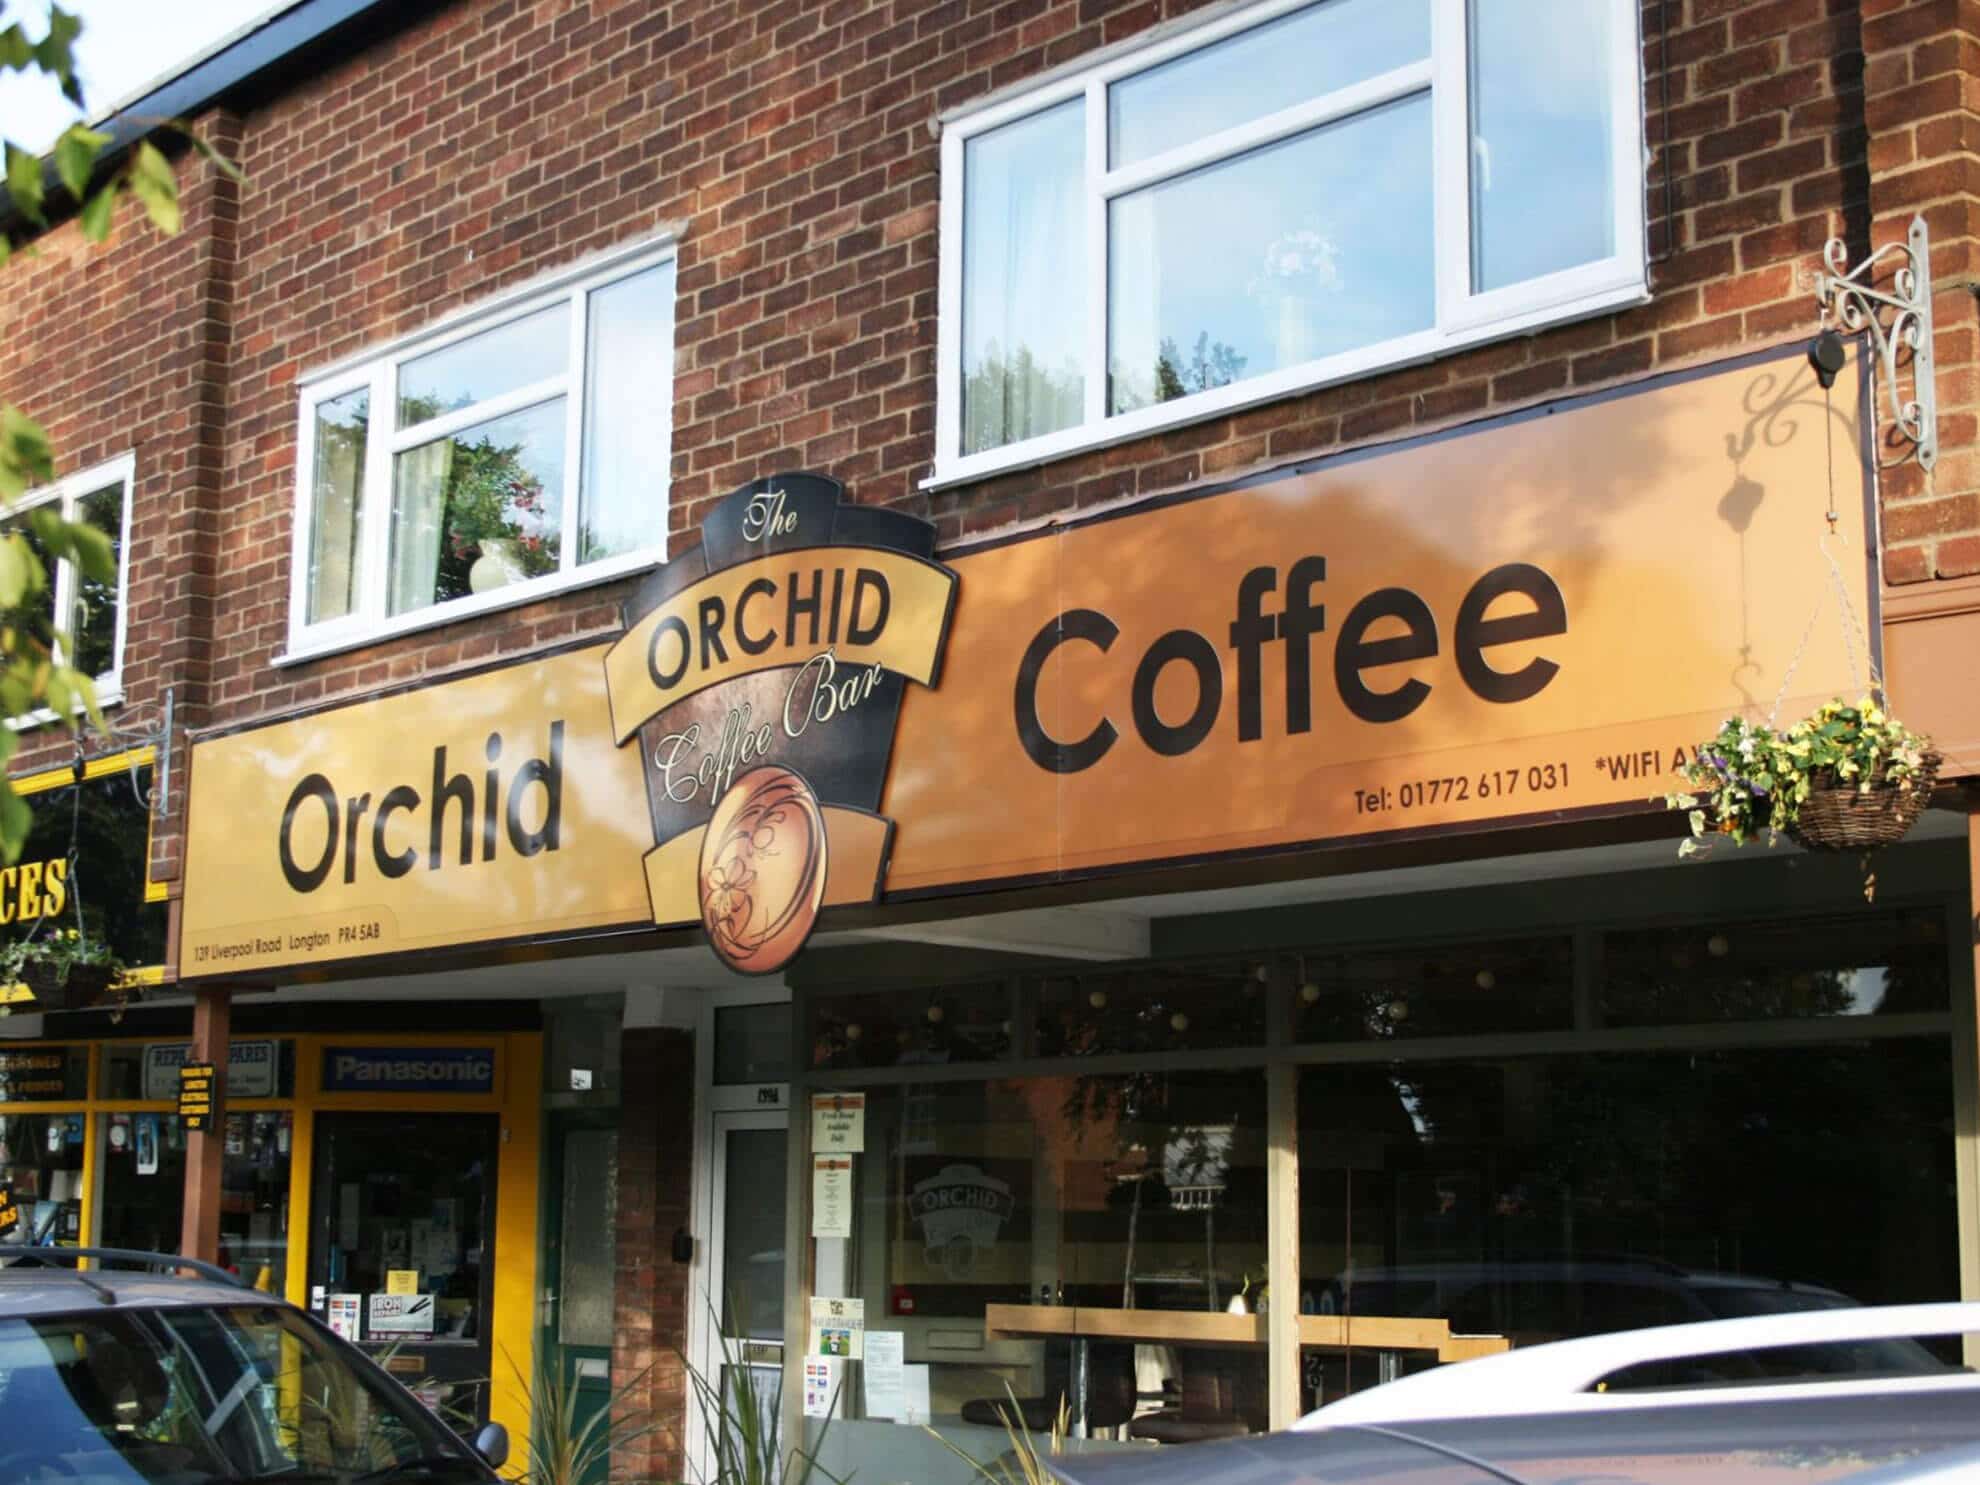 Orchid Coffee shop sign - Full colour digital print flat panel with shaped stand off panel